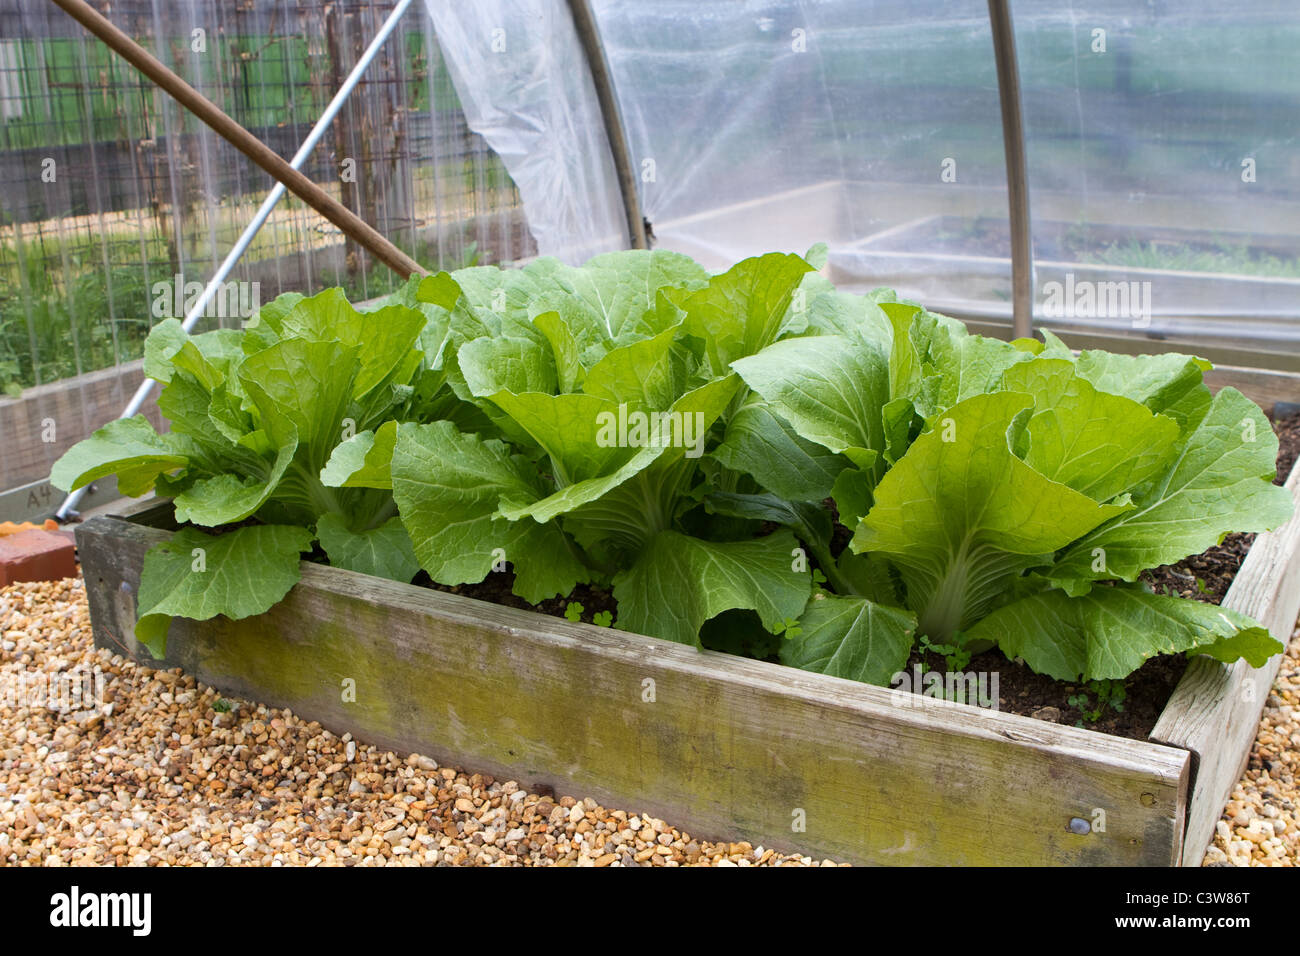 Homegrown leaf lettuce in a wooden above ground box in a backyard garden greenhouse. Stock Photo